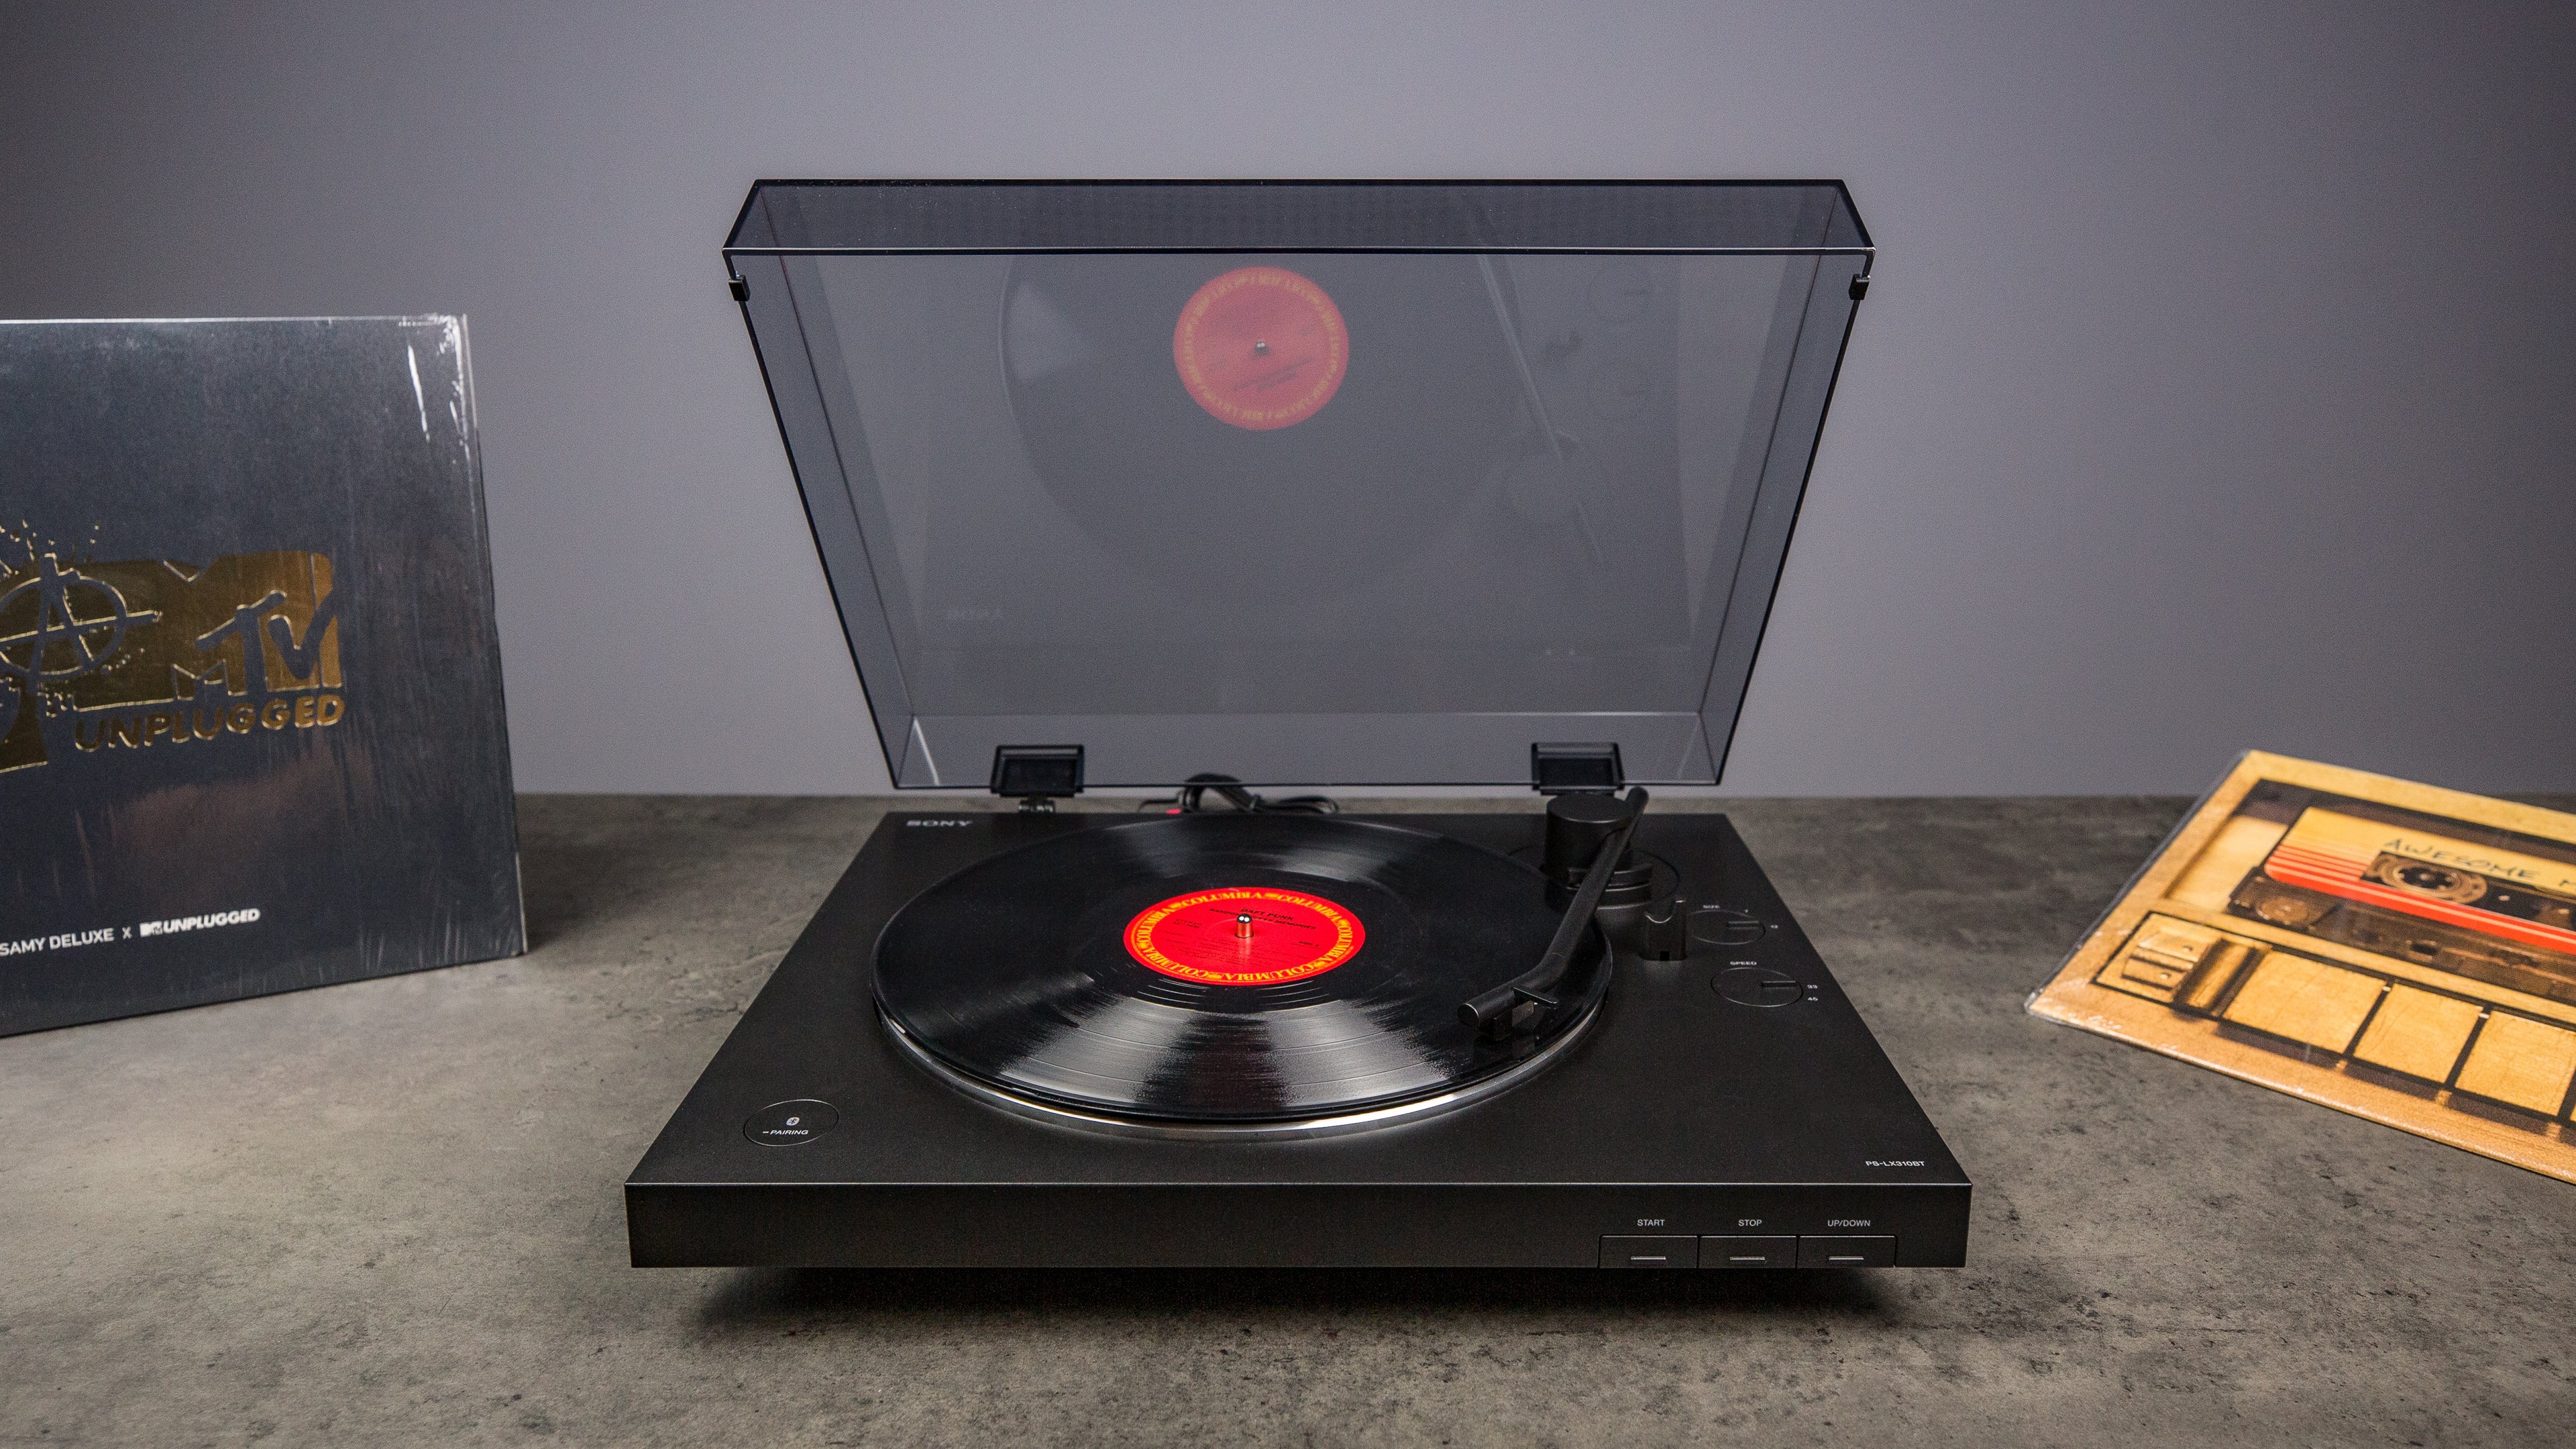 https://fscl01.fonpit.de/userfiles/7043987/image/Sony-Turntable-BT/androidpit-sony-turntable-bt-18.jpg